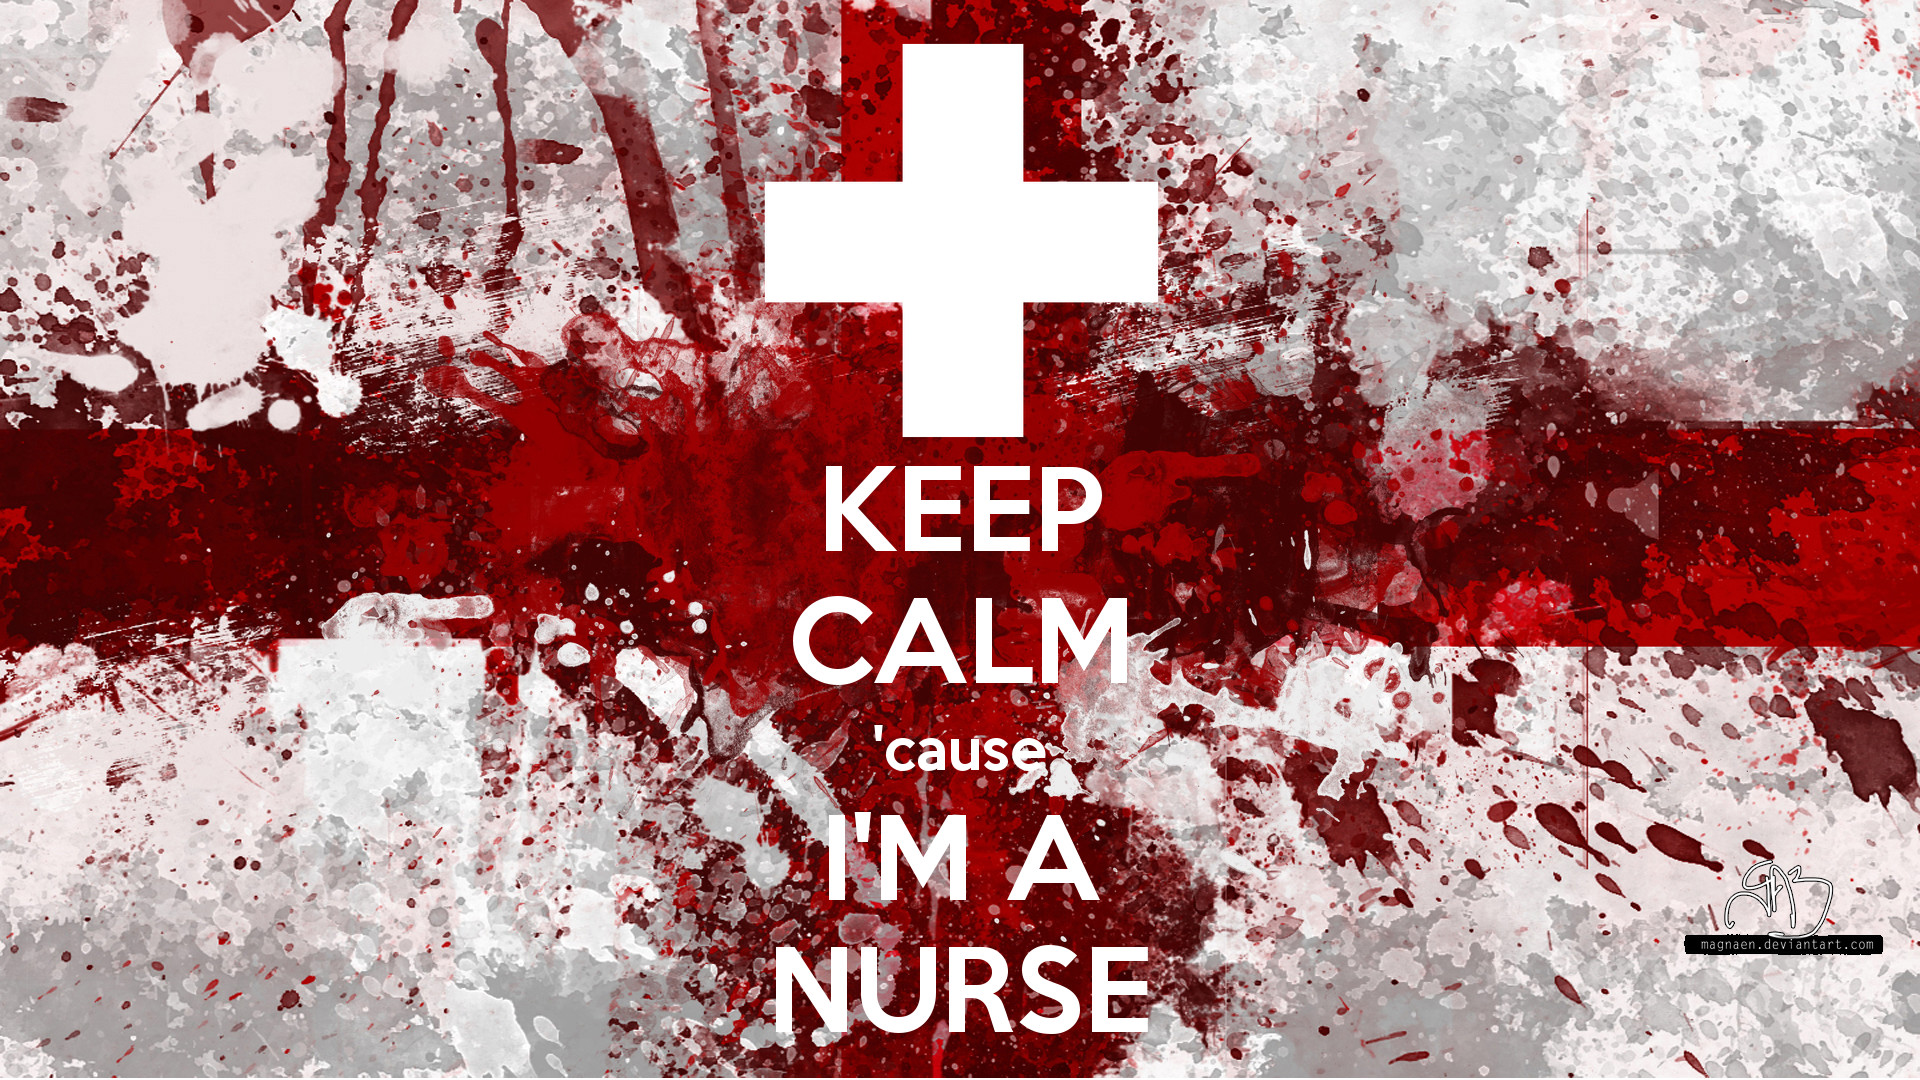 Aesthetic International Nurses Day Background Wallpaper Image For Free  Download  Pngtree